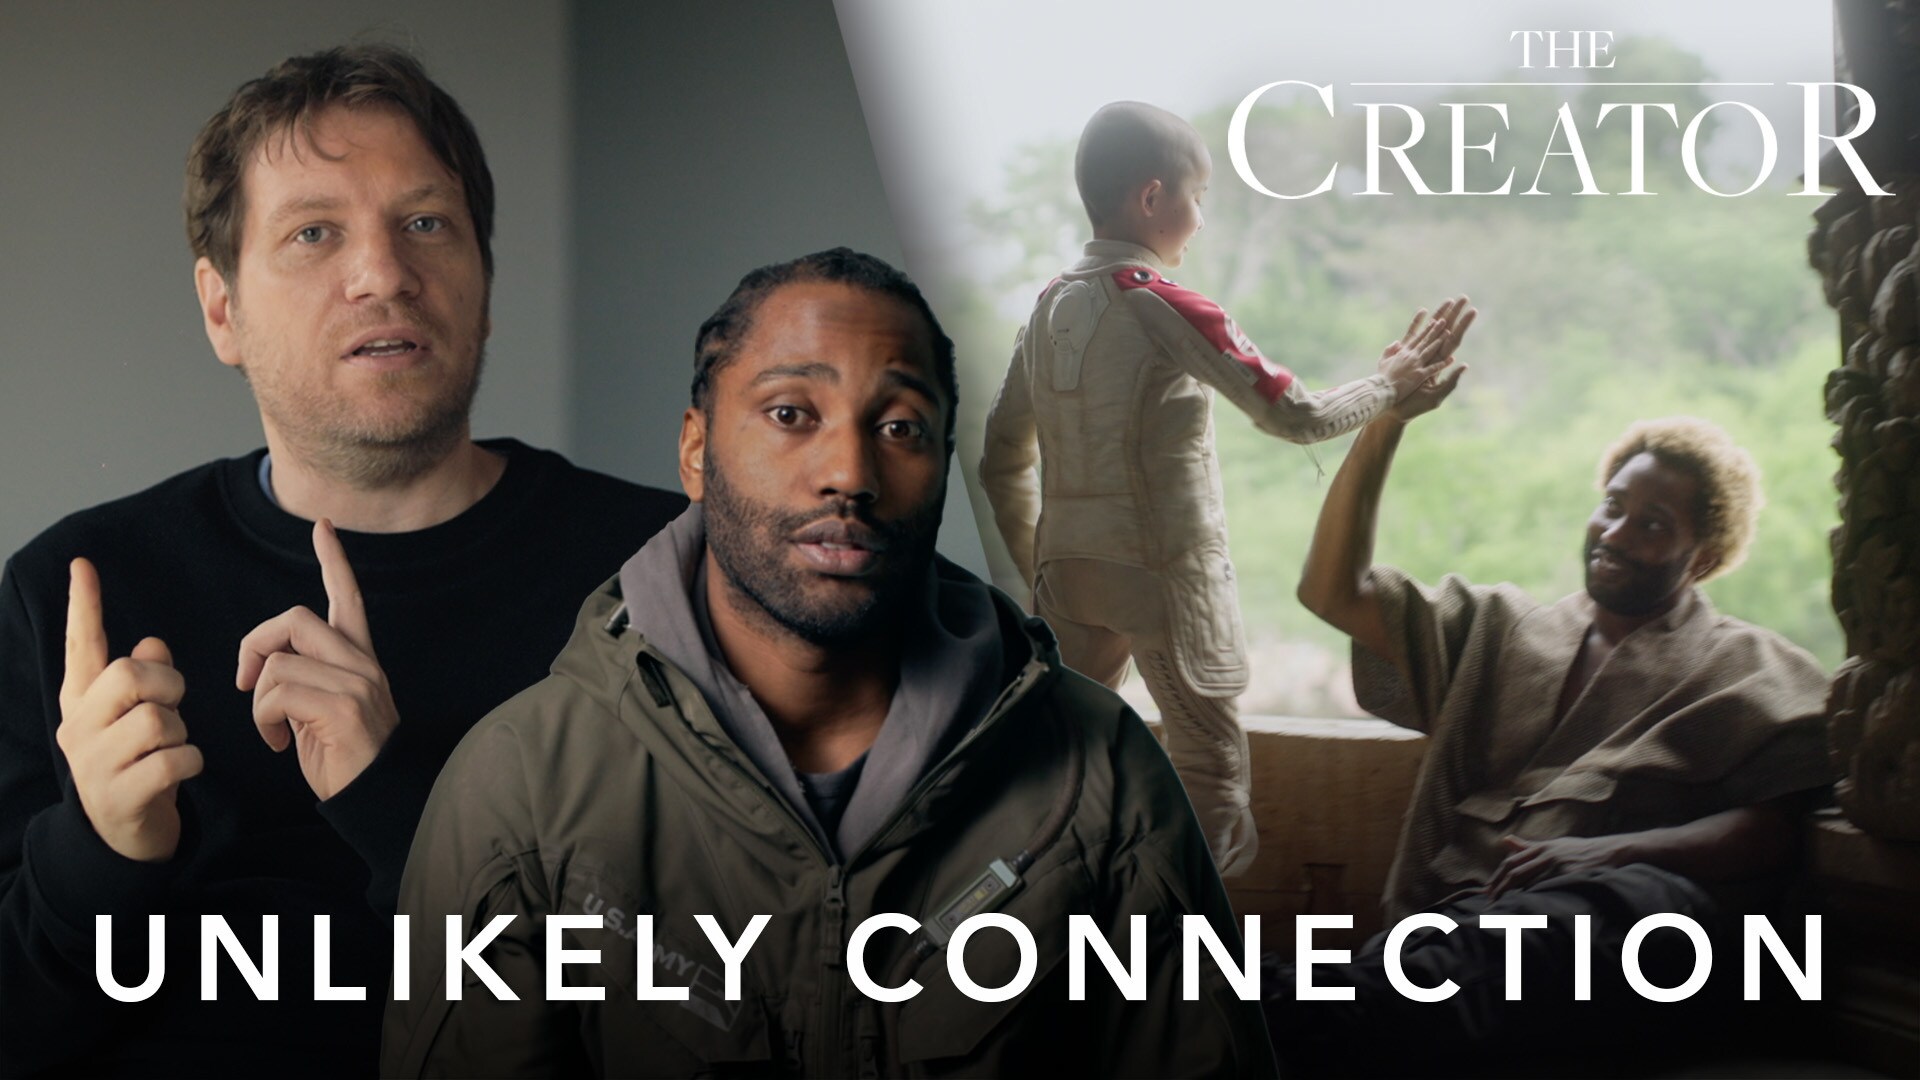 The Creator | Unlikely Connection | 20th Century Studios